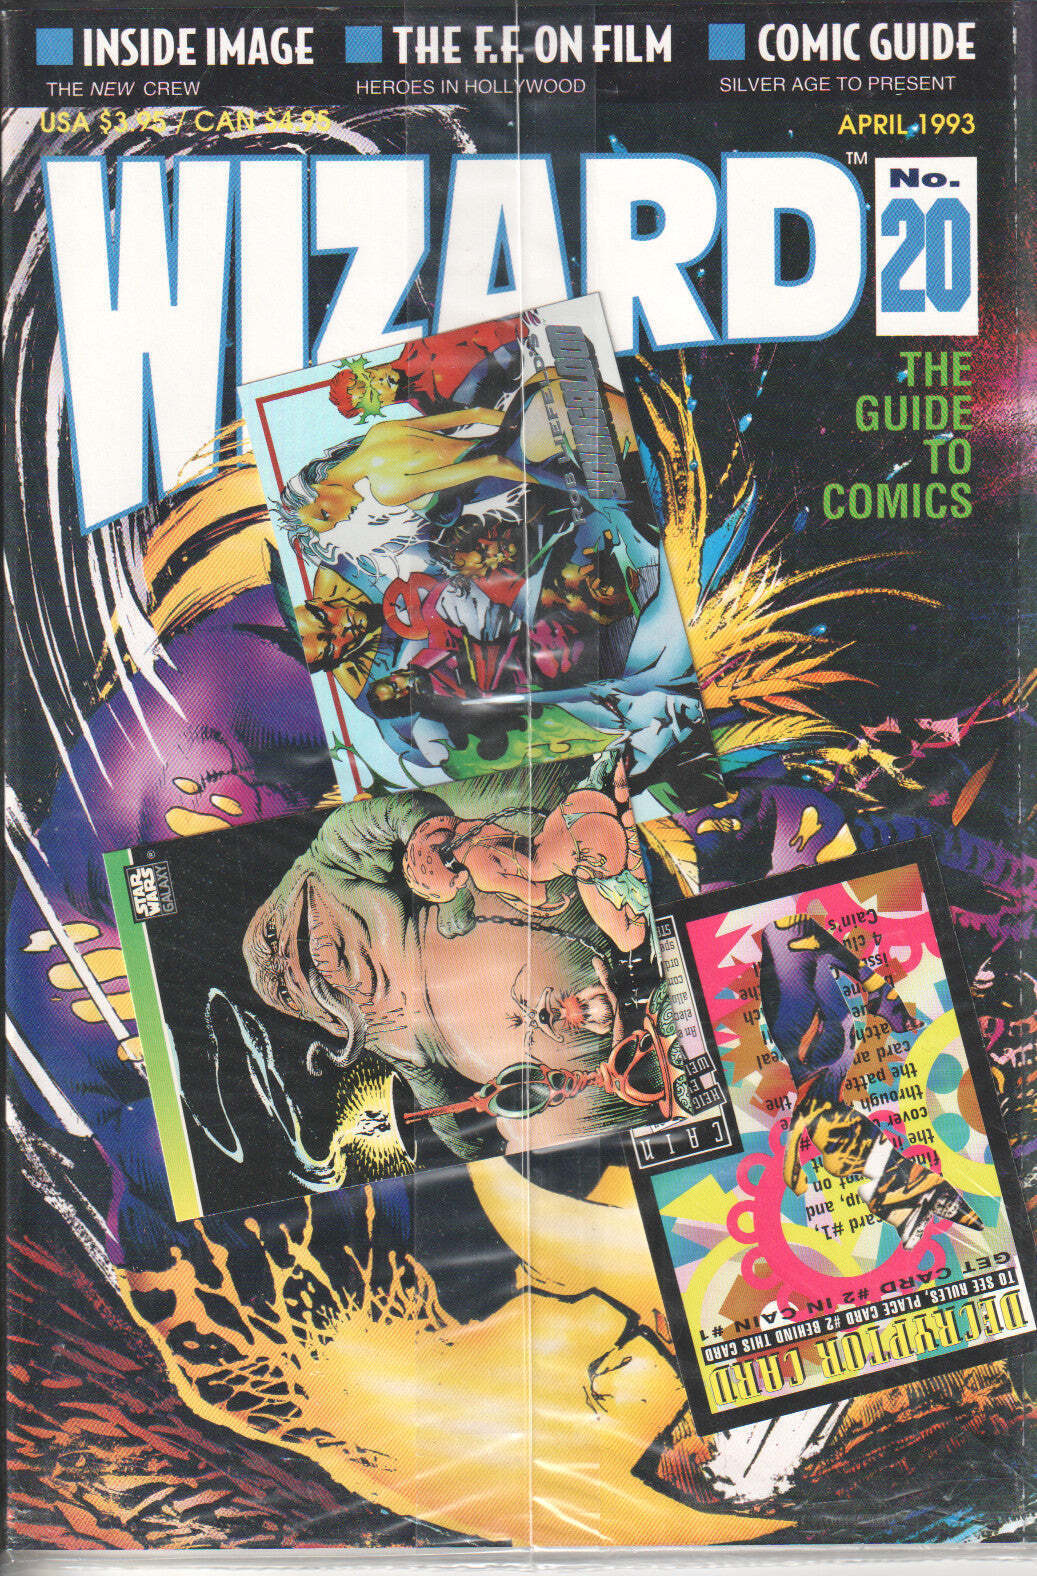 Wizard Magazine #20 April 1993 Sealed with Cards